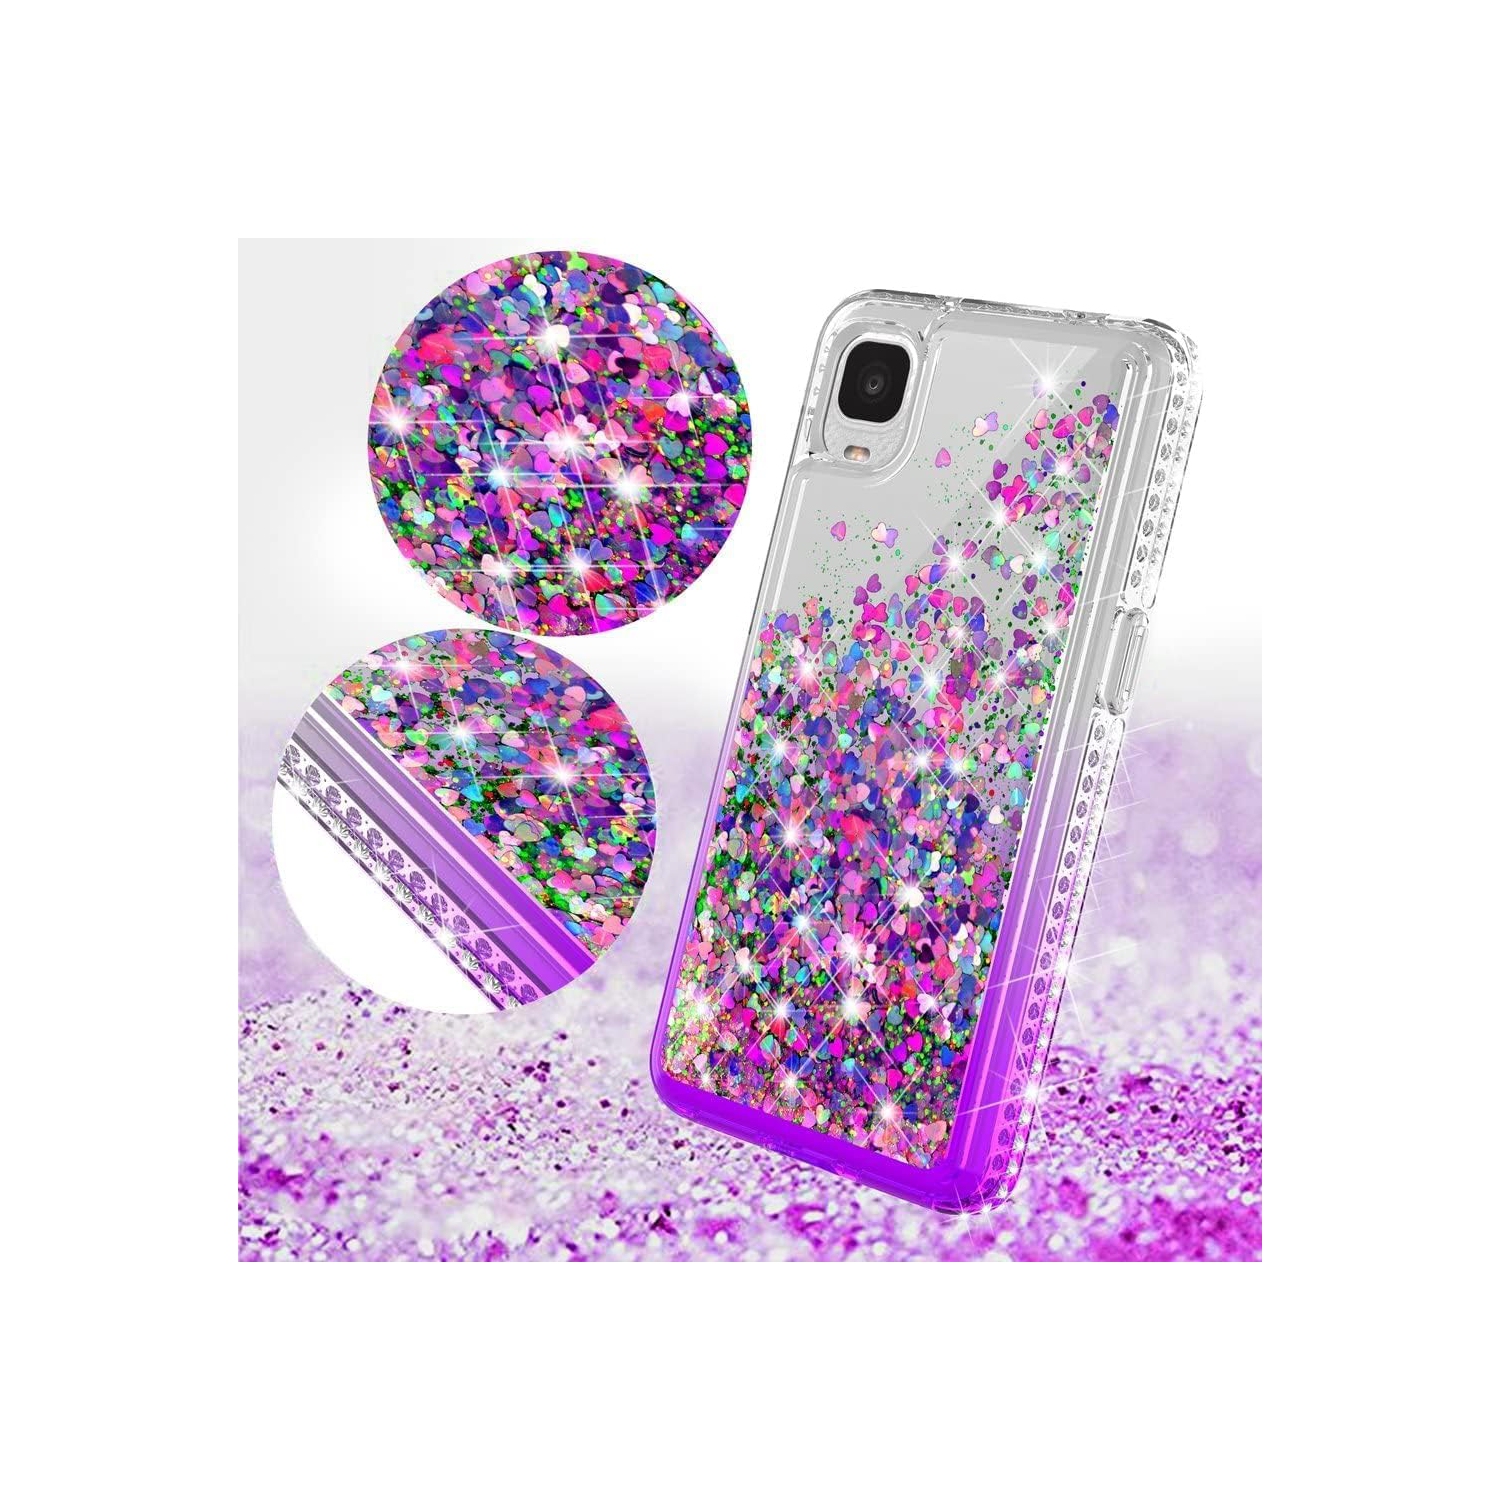 Compatible for TCL A3 Case/TCL A30 Case/TCL ion Z Phone Case Liquid Quicksand Glitter Phone Case Cover Full Body